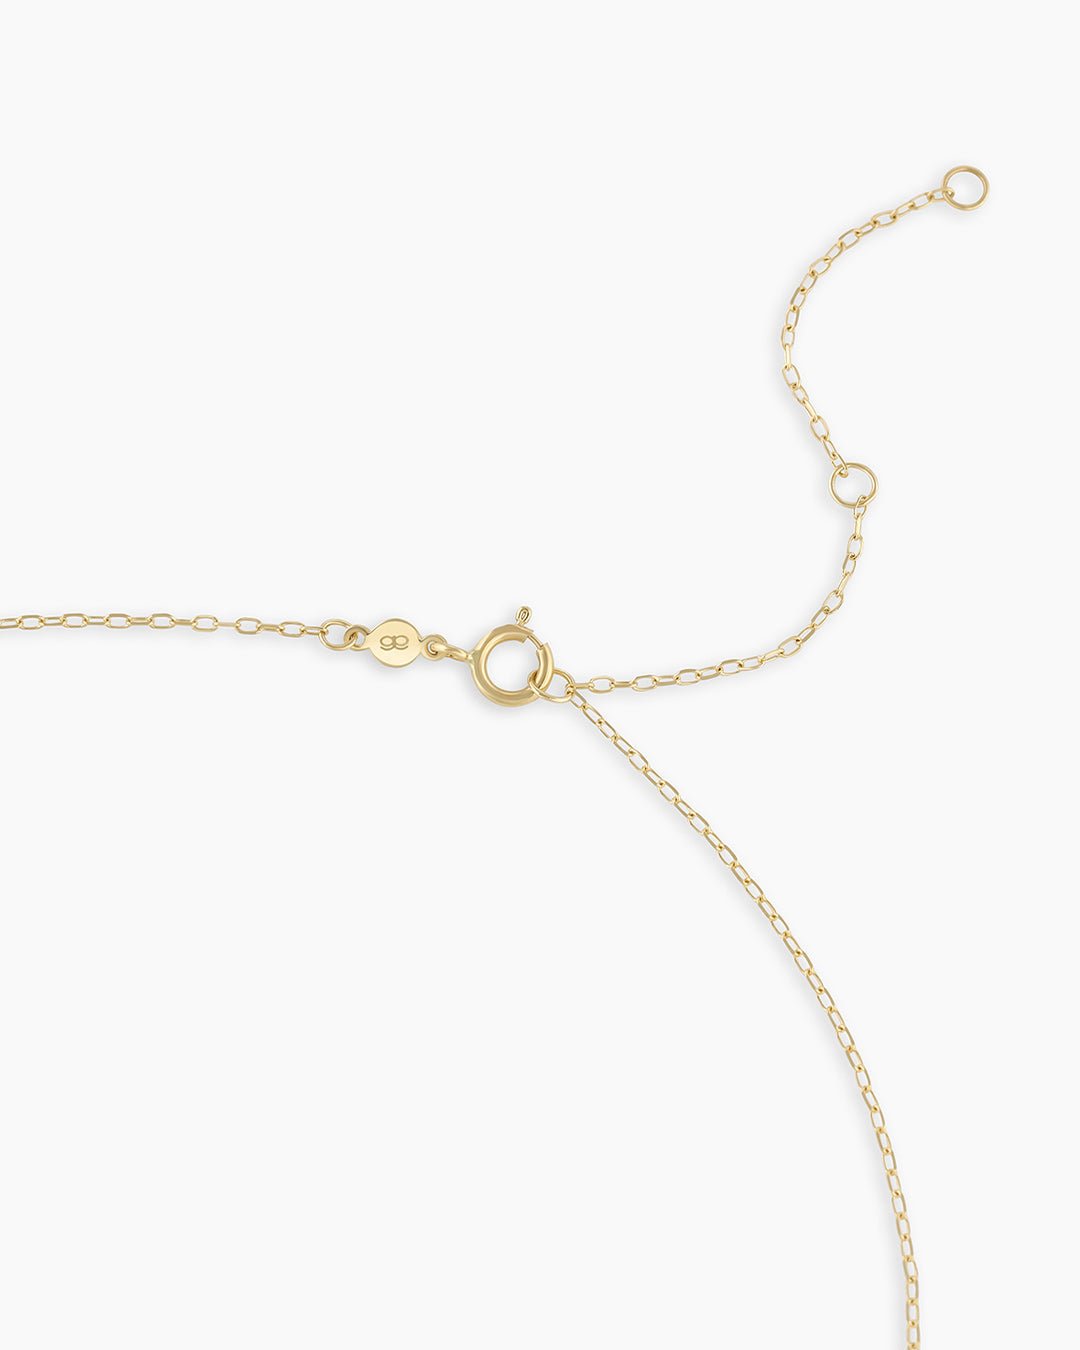 Classic  Five Diamond Necklace || option::14k Solid Gold